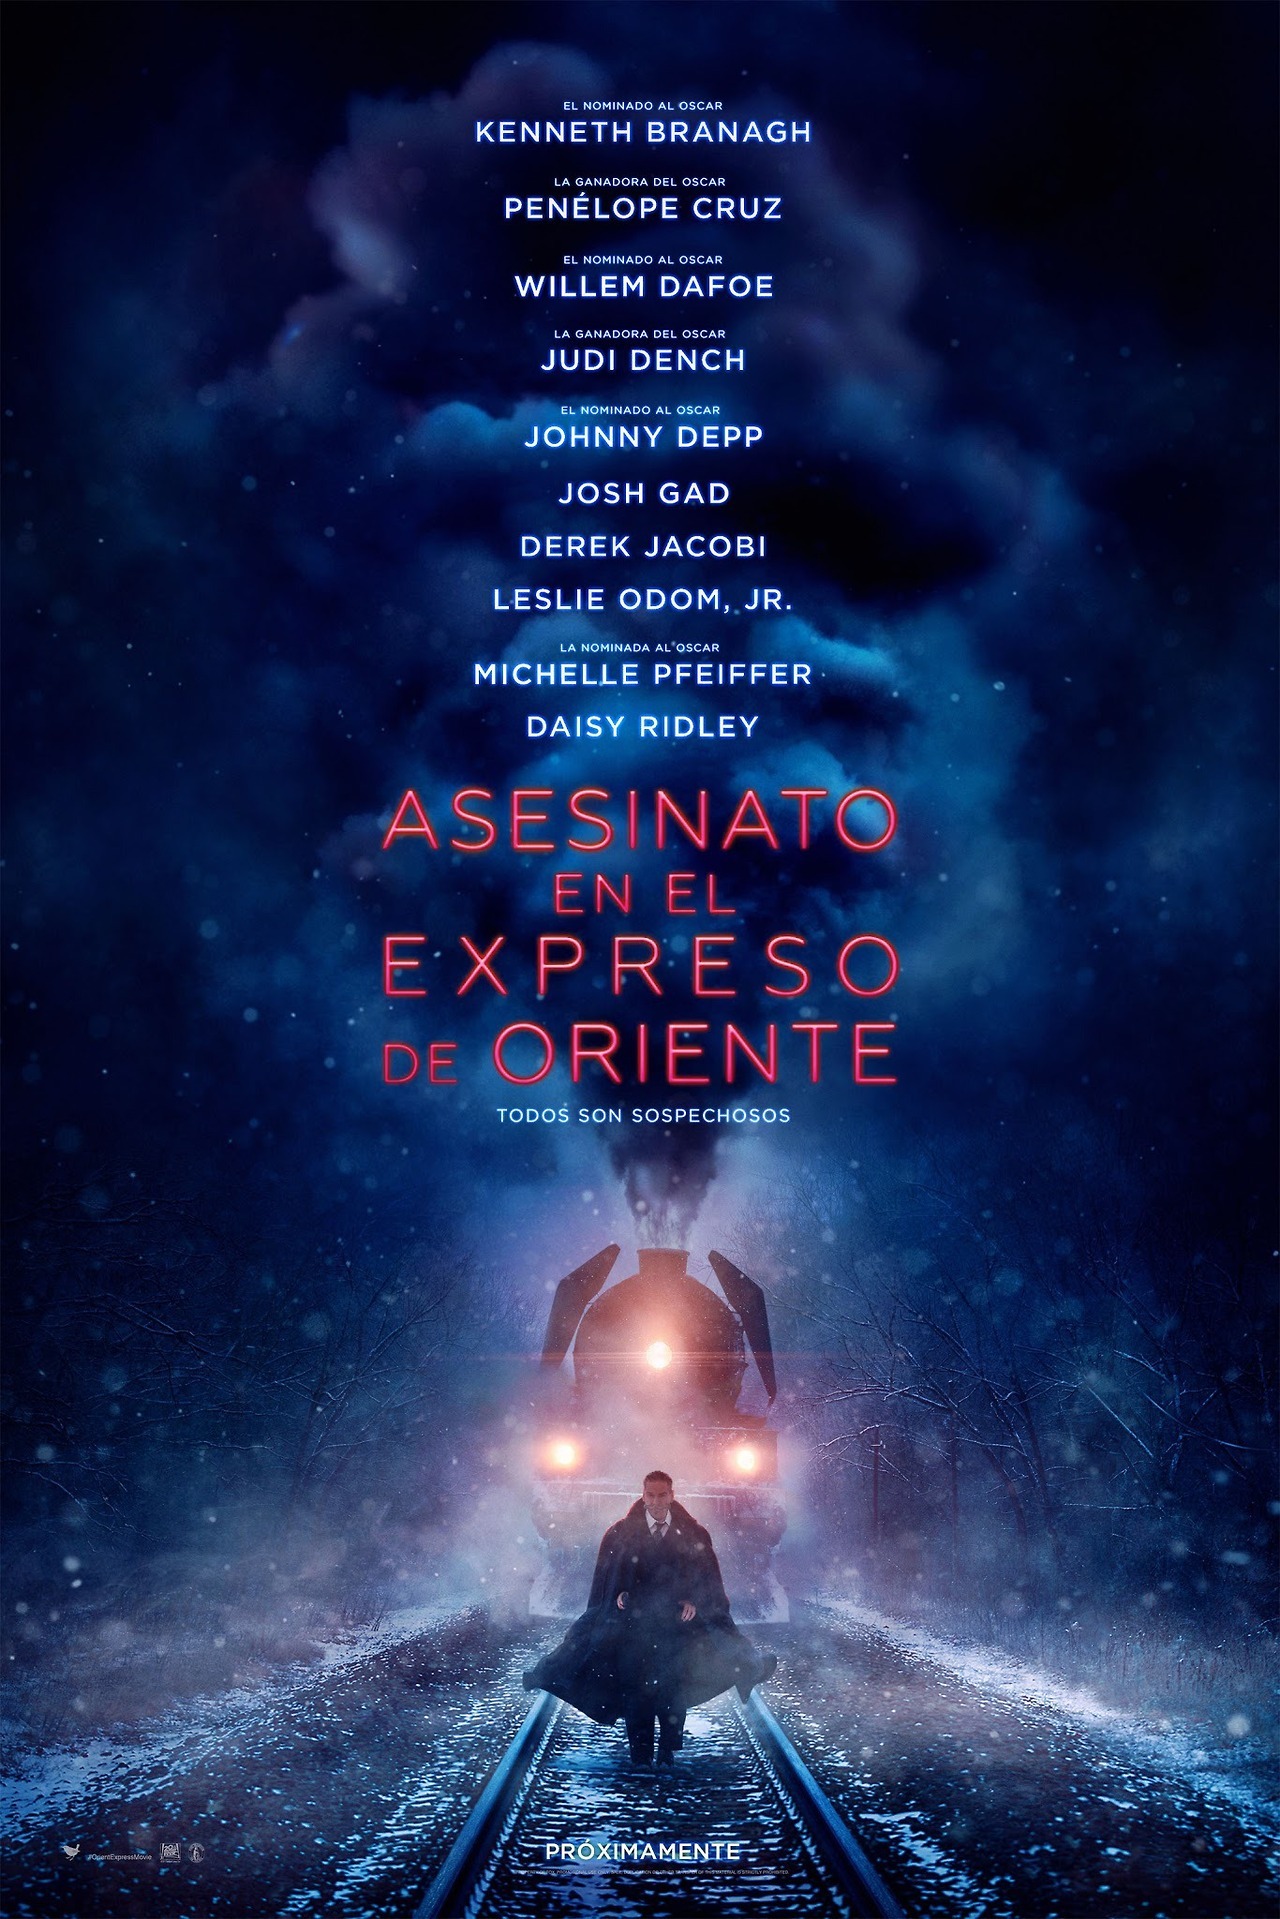 Murder on the Orient Express de et avec Kenneth Branagh - Page 3 Tumblr_oscgwkXoWg1rs3i49o1_1280